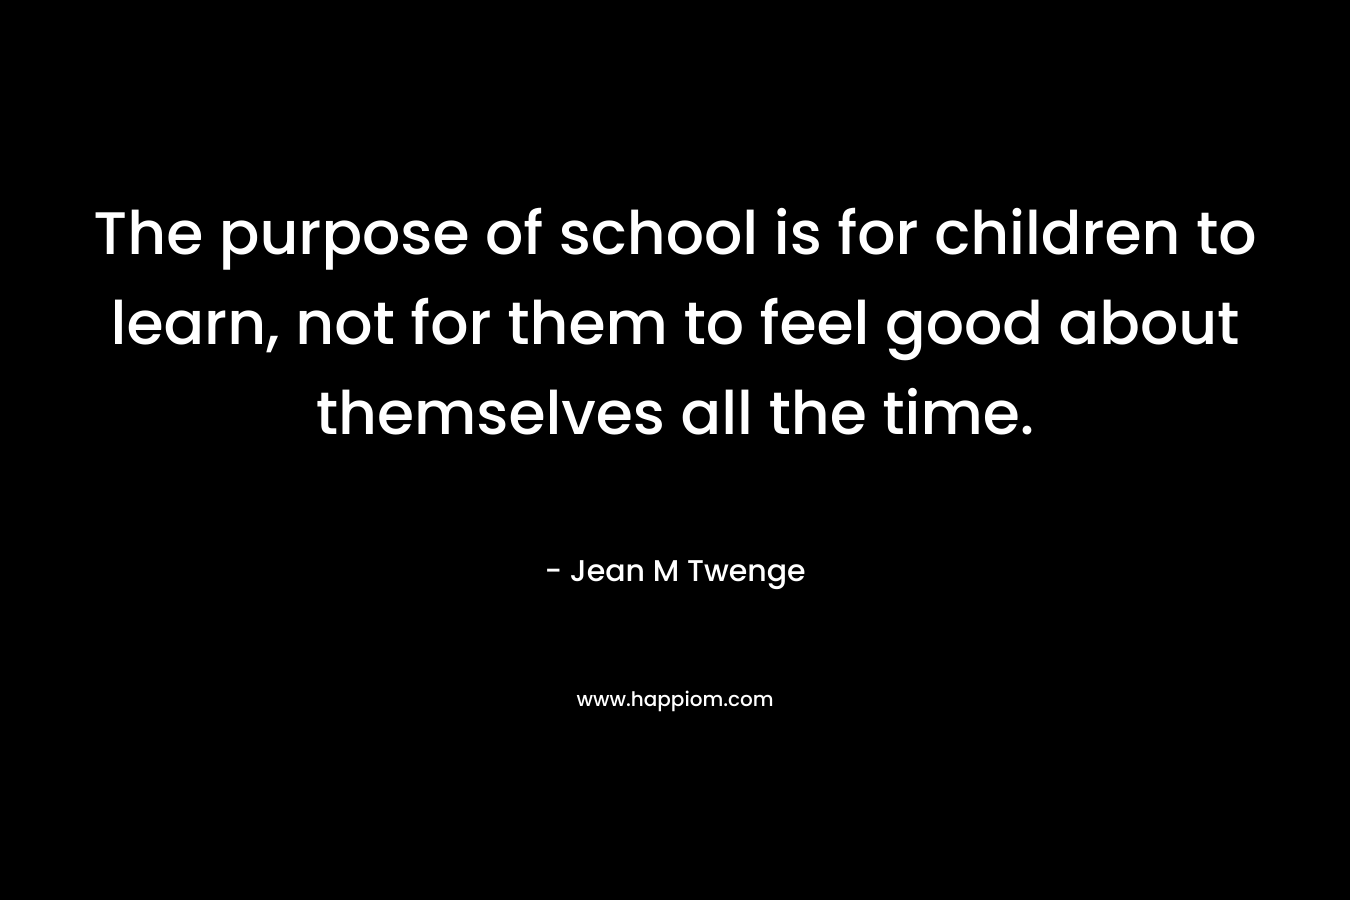 The purpose of school is for children to learn, not for them to feel good about themselves all the time.